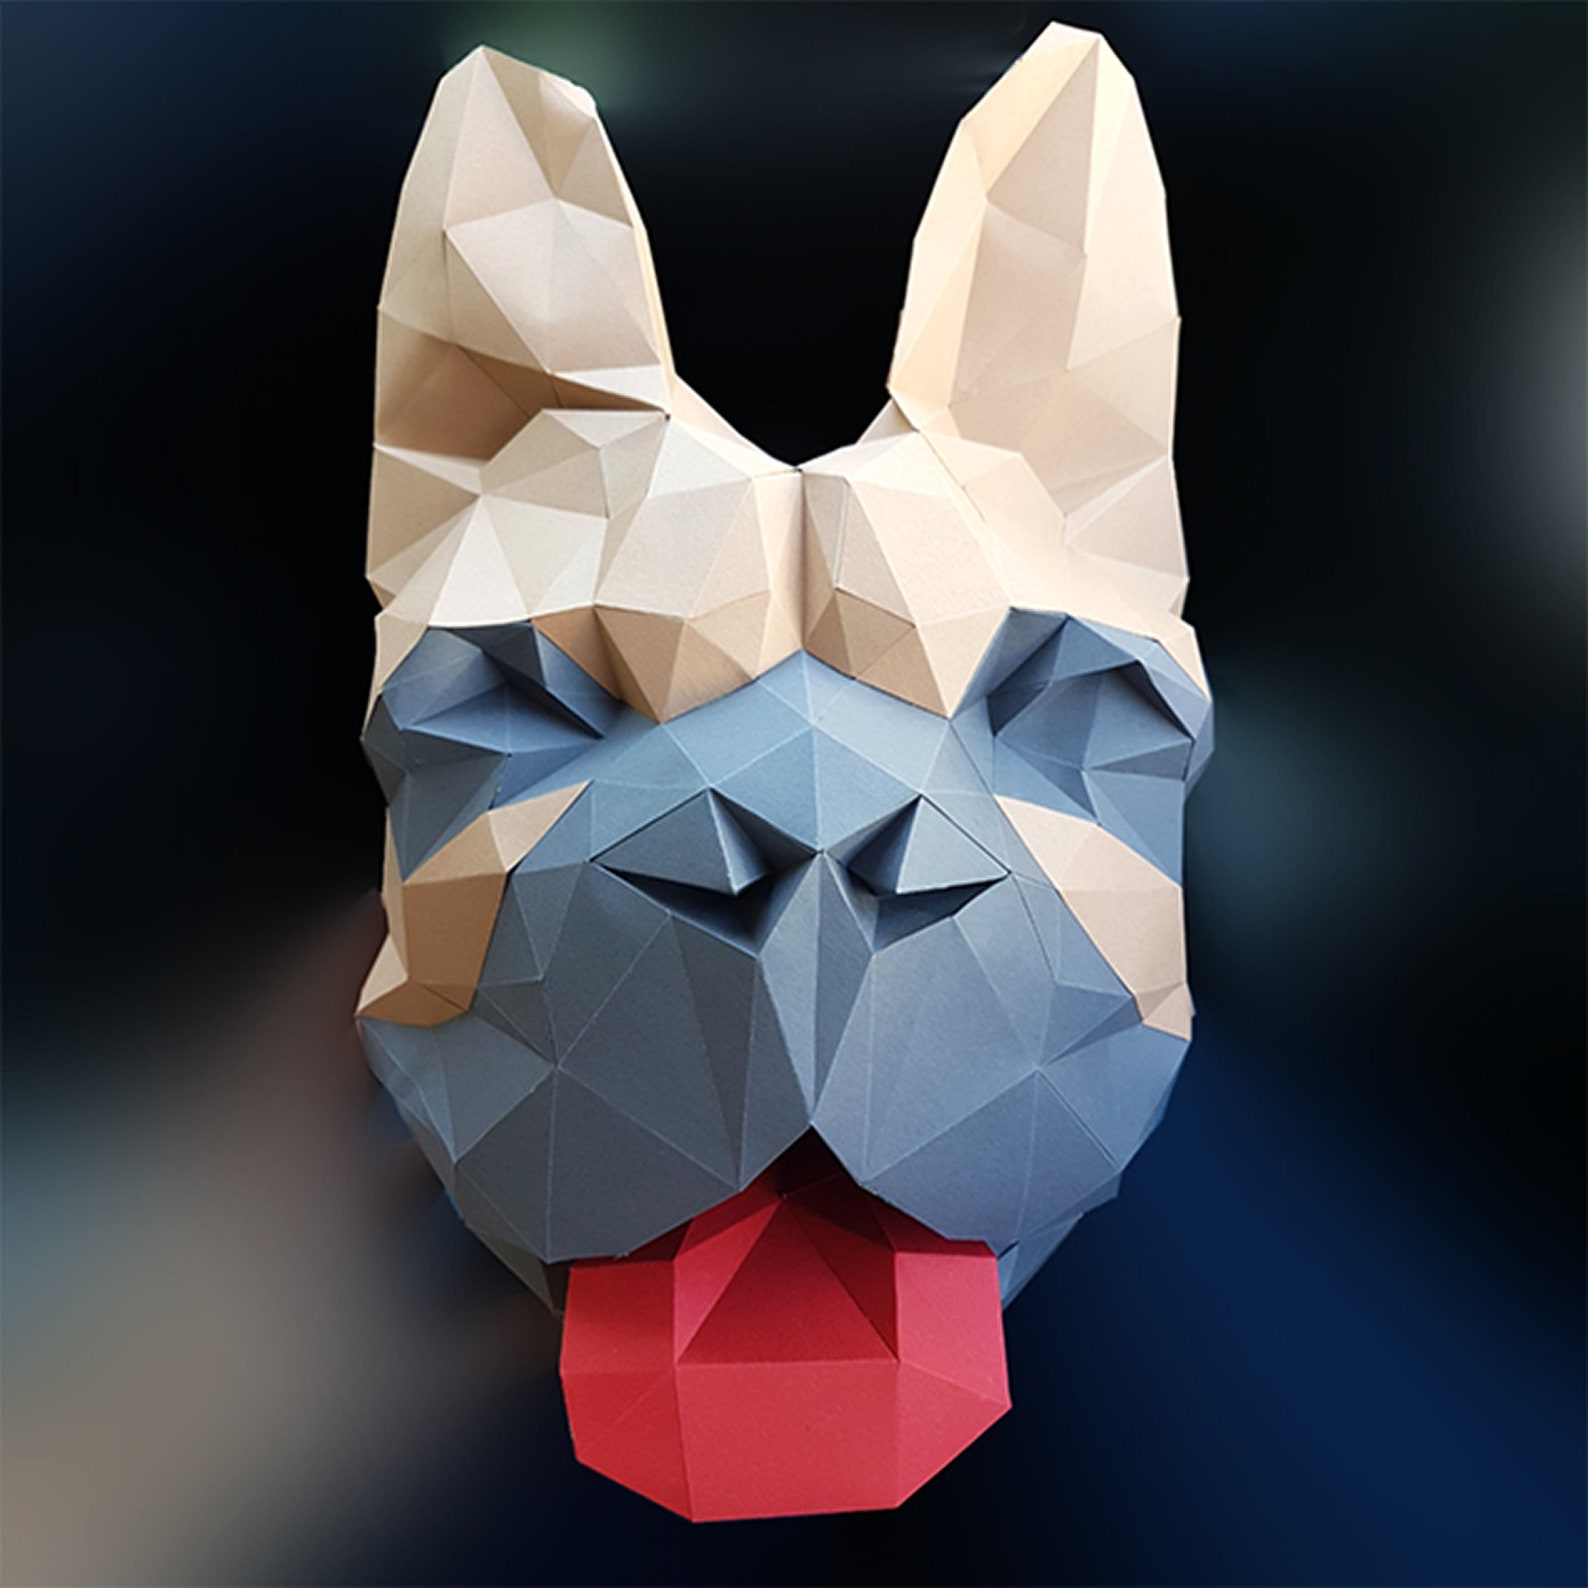 French Bulldog Papercraft Sculpture Printable 3D Puzzle - Etsy